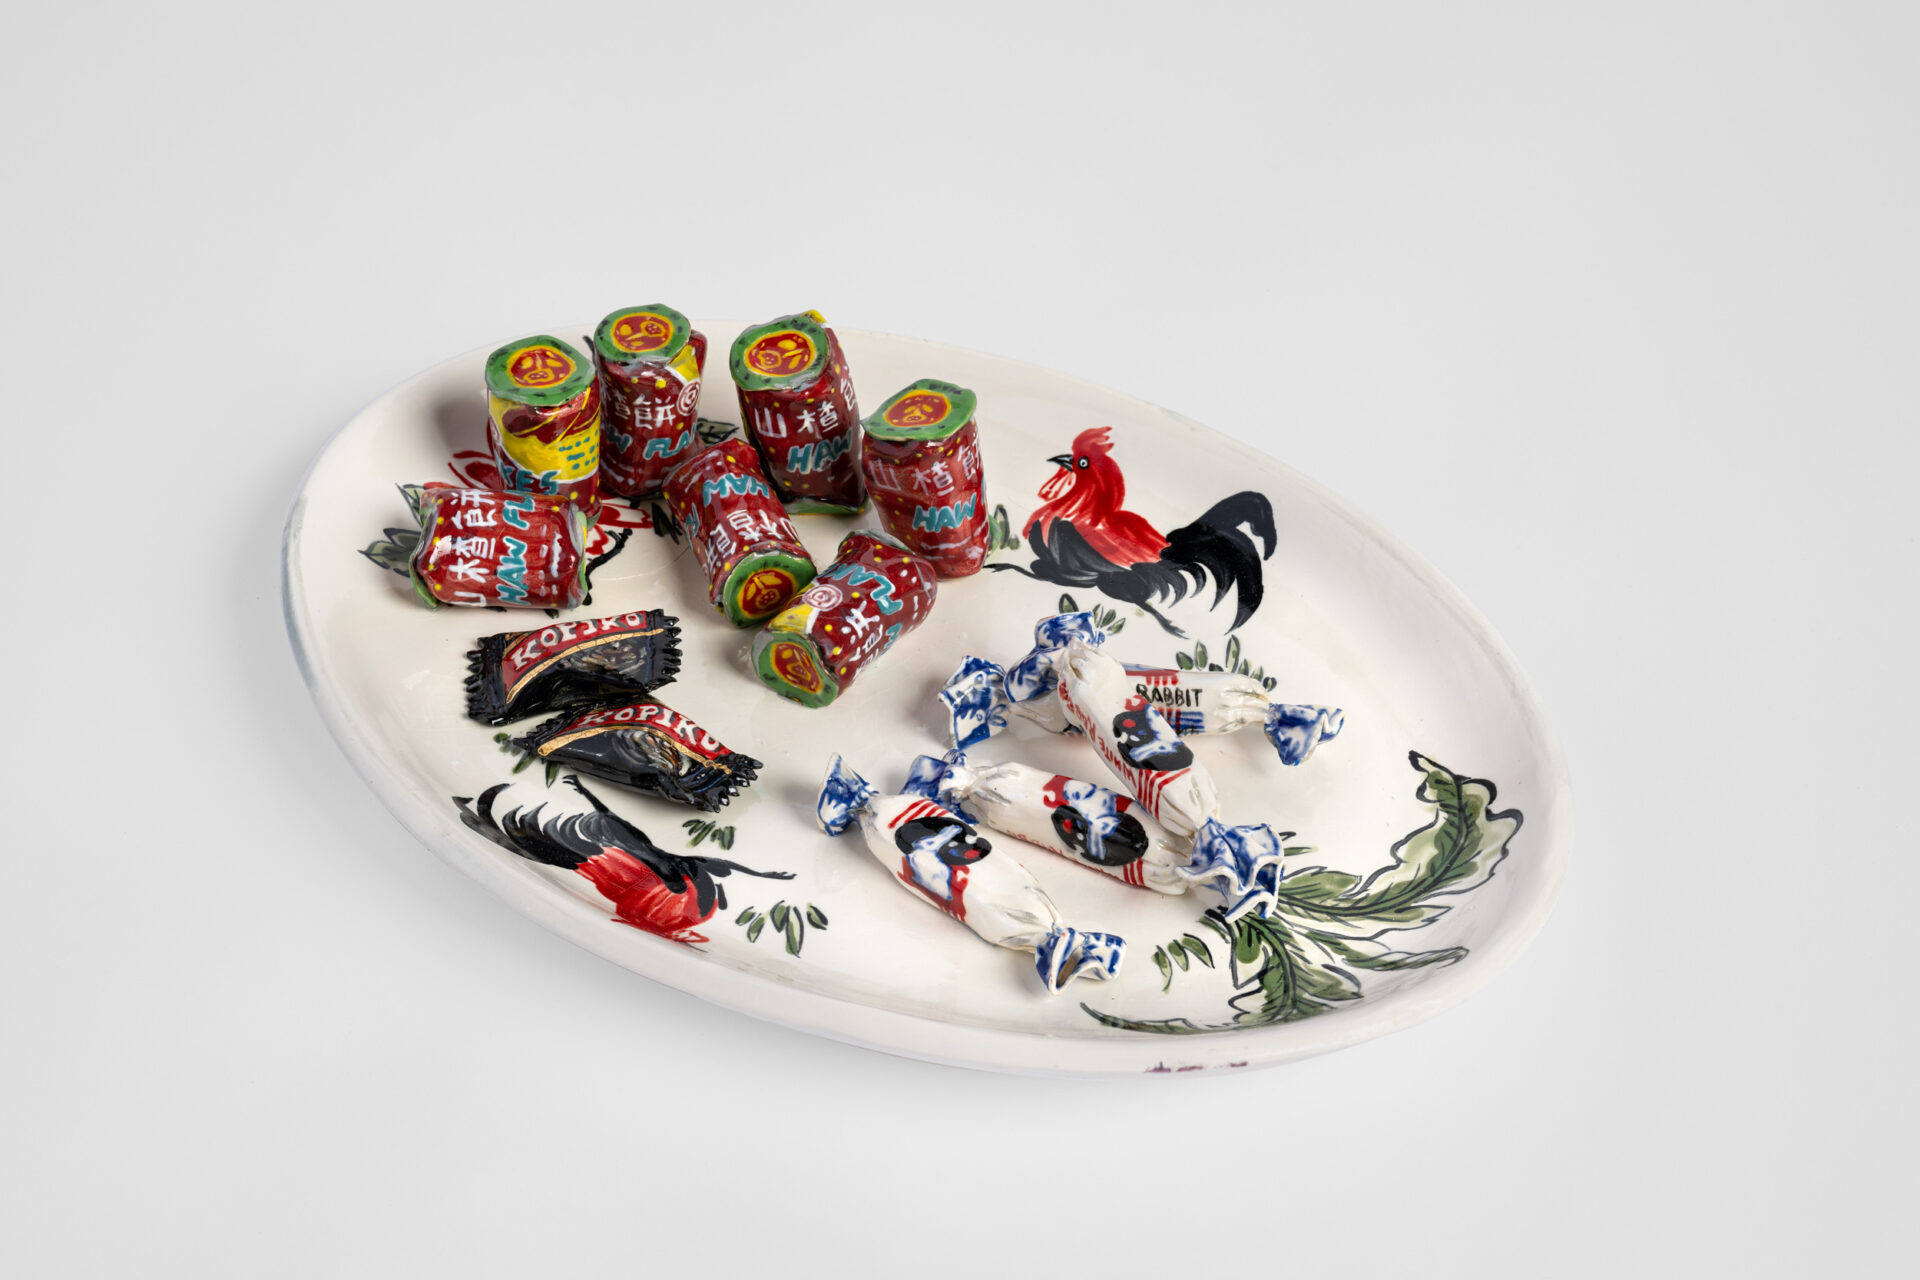 Rooster Plate with Haw Haw, Kopiko and White Rabbit Candy